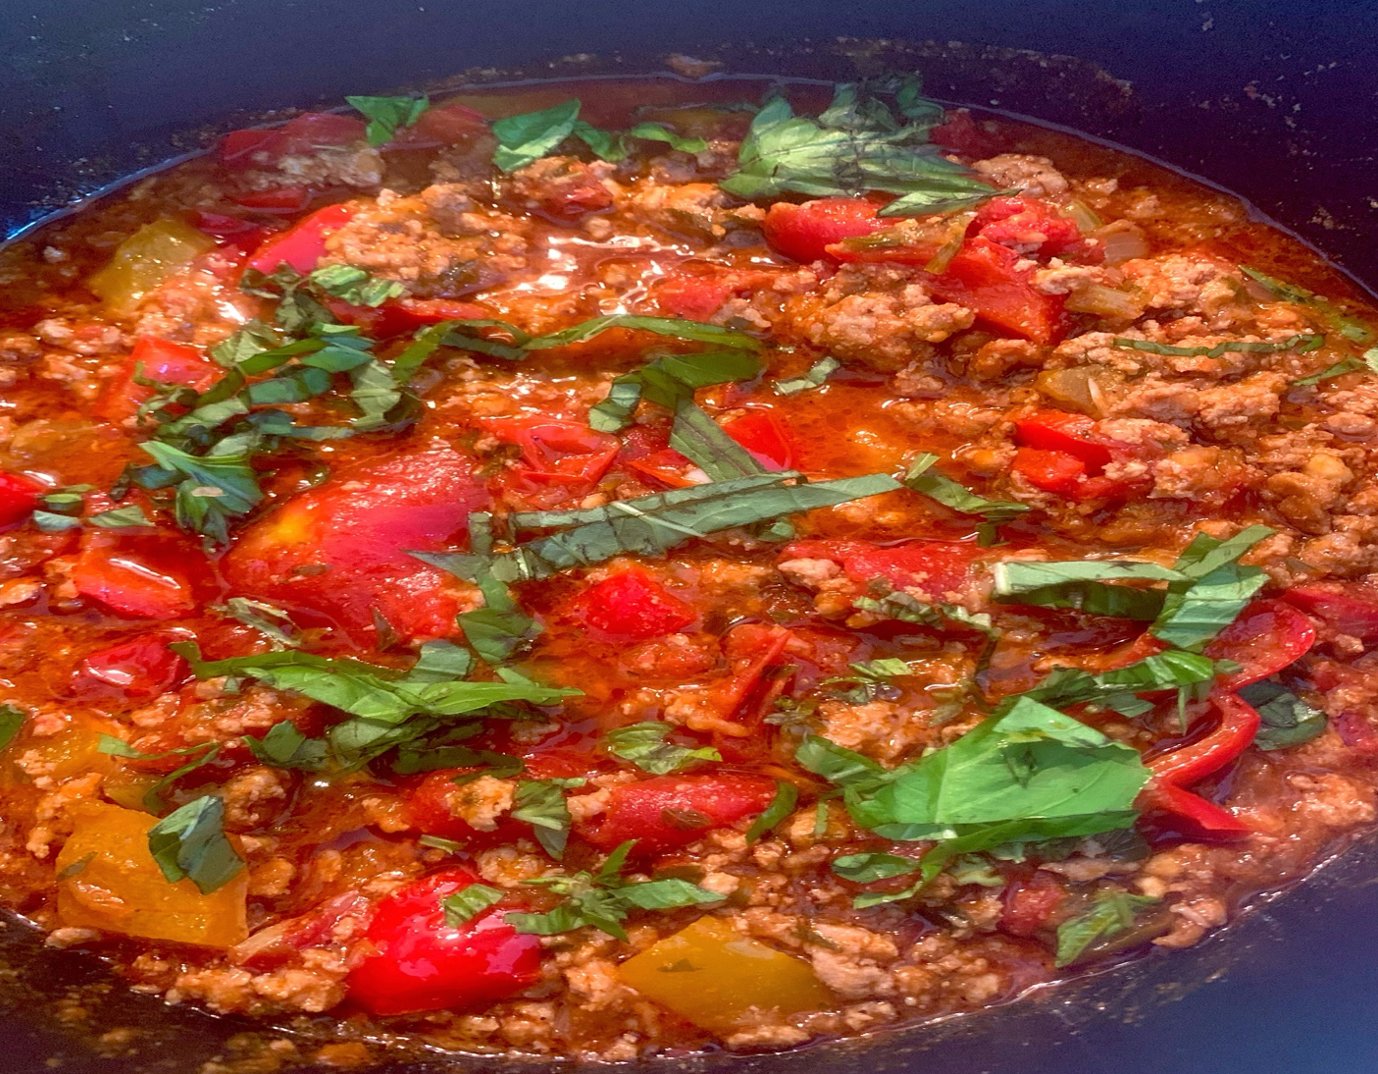 Wondering what to do with leftover turkey? Try making some chili with sweet Italian sausage, red and orange peppers.